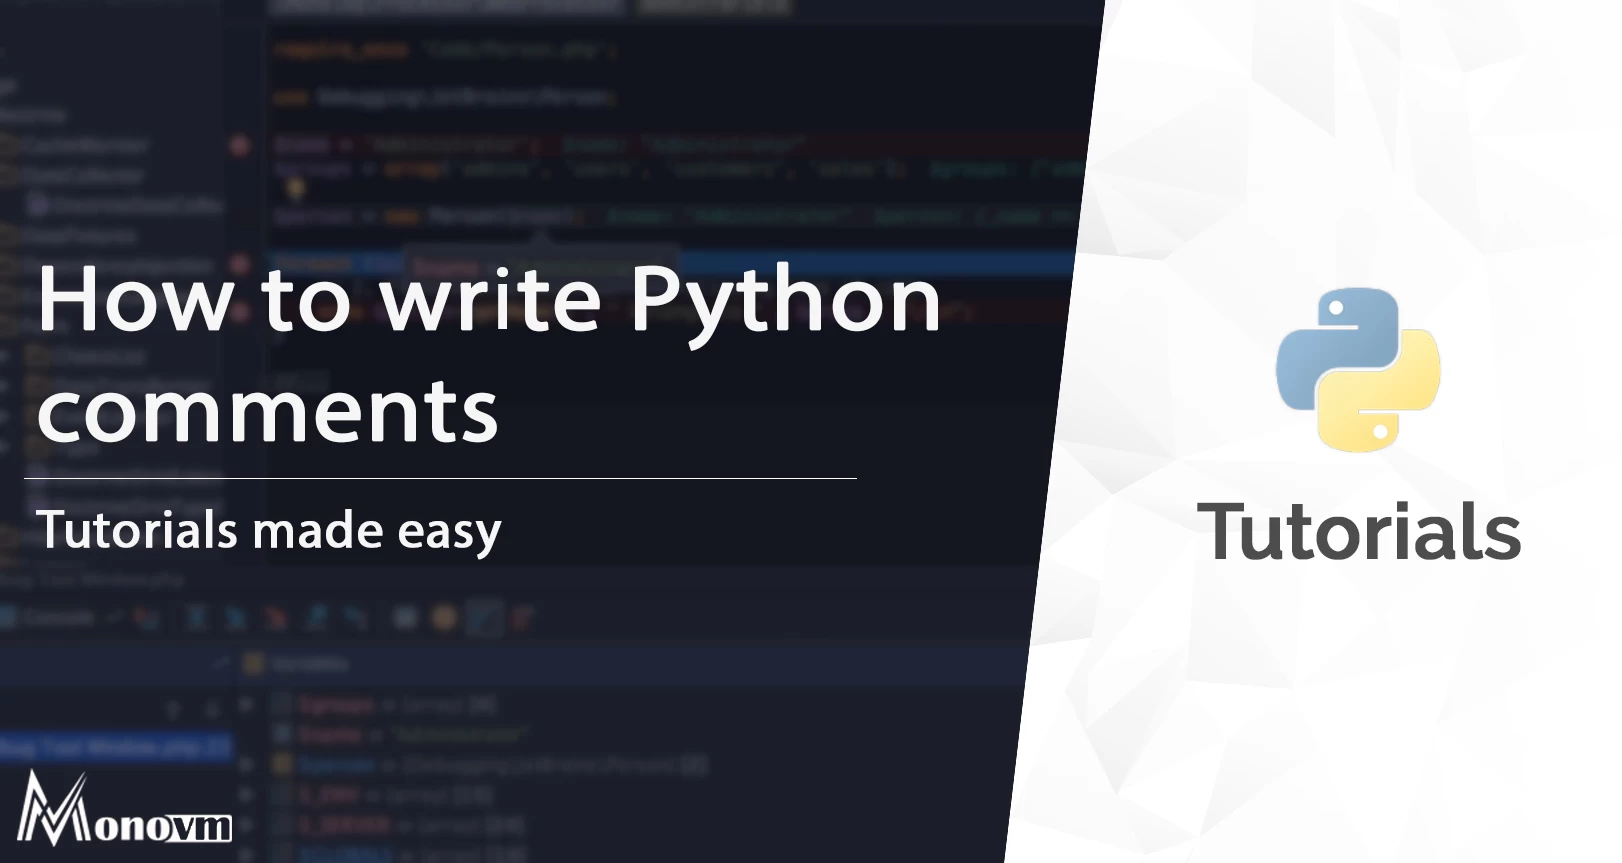 How to write comments in Python